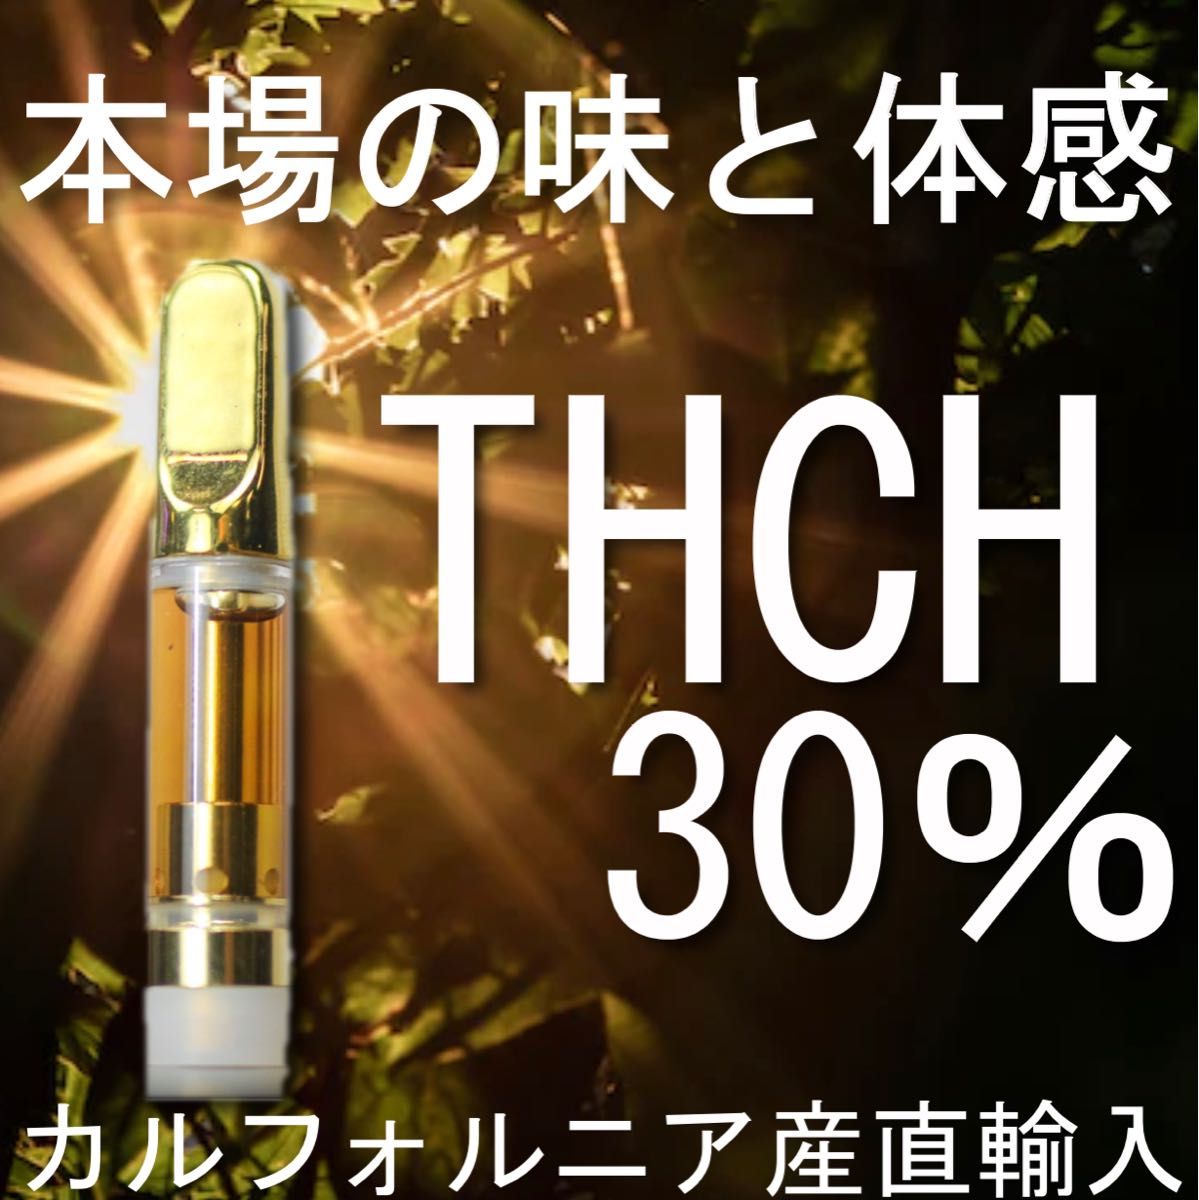 THCH 30% 1ml リキッド｜PayPayフリマ